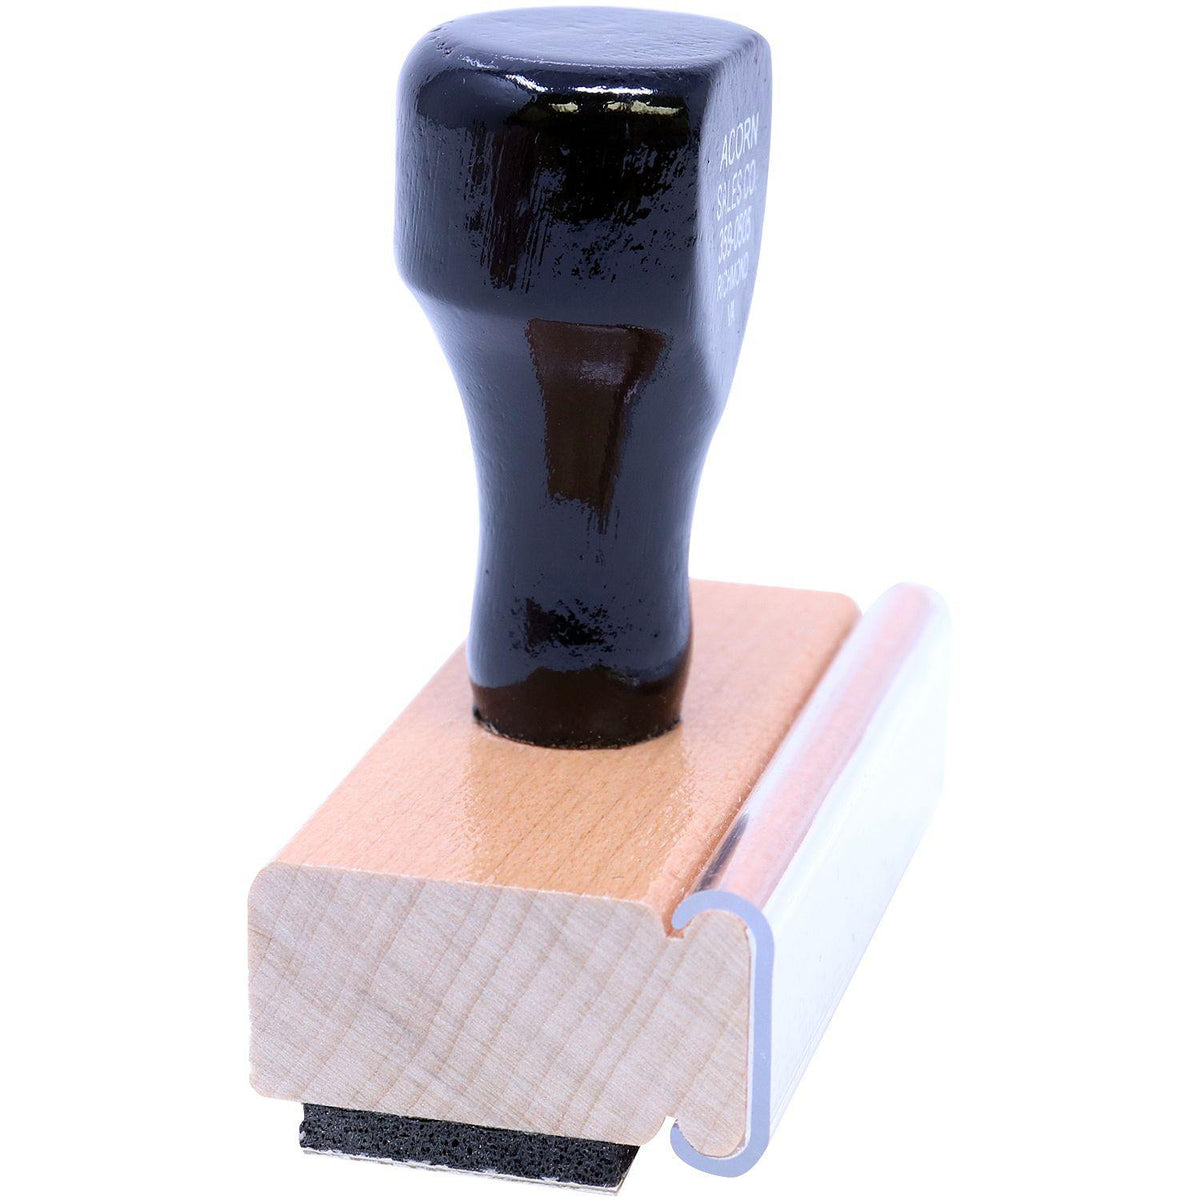 Side View of Approved Rubber Stamp at an Angle